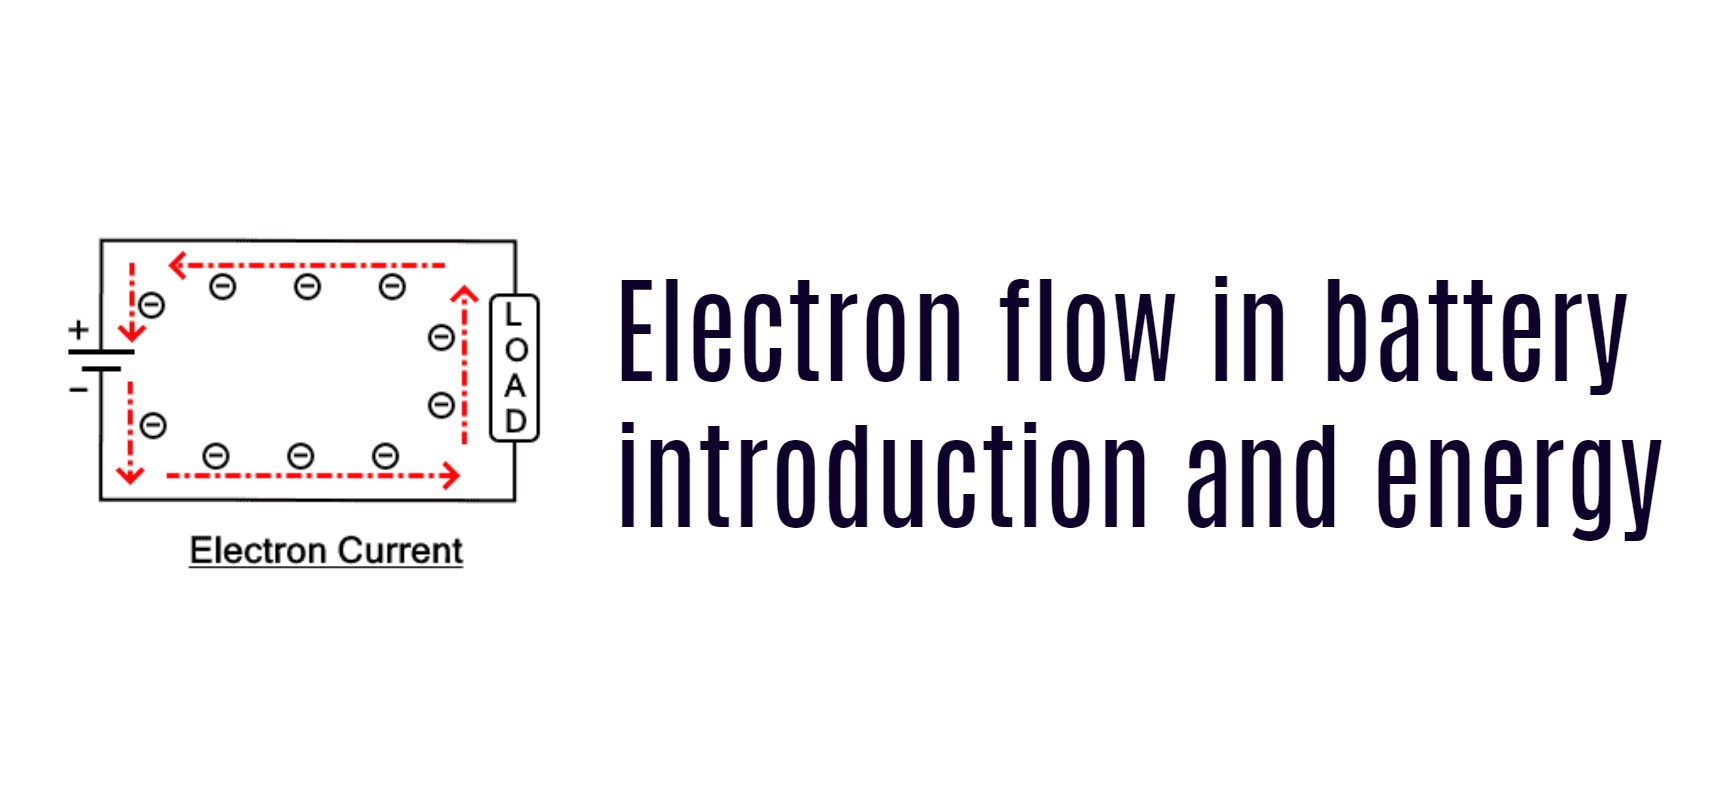 Electron flow in battery introduction and energy